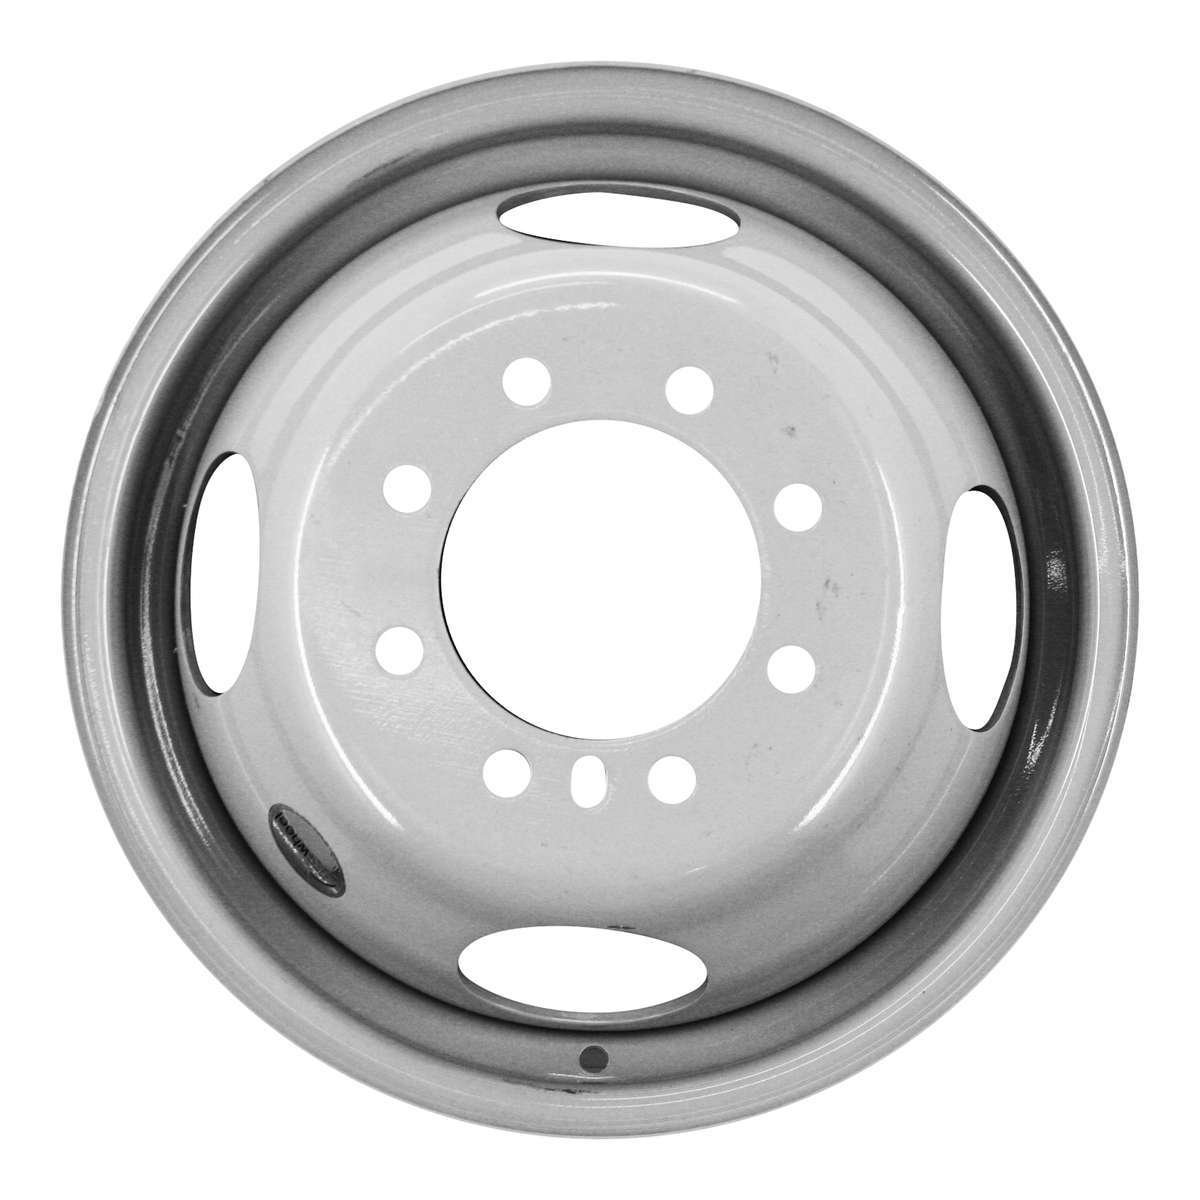 1993 Ford F-350 New 16" Replacement Wheel Rim RW3036S